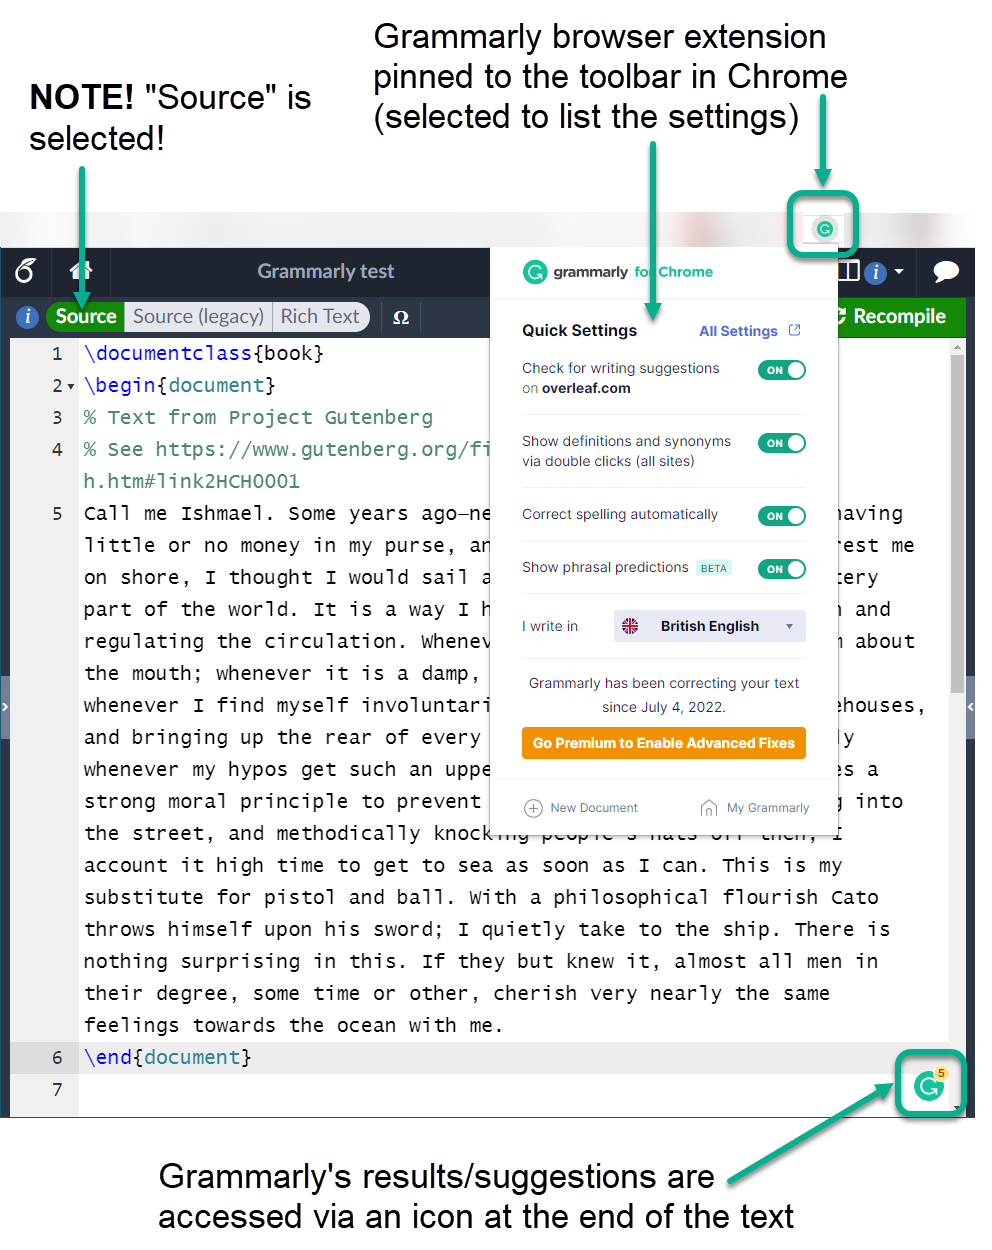 Image showing available settings in Grammarly Chrome extension